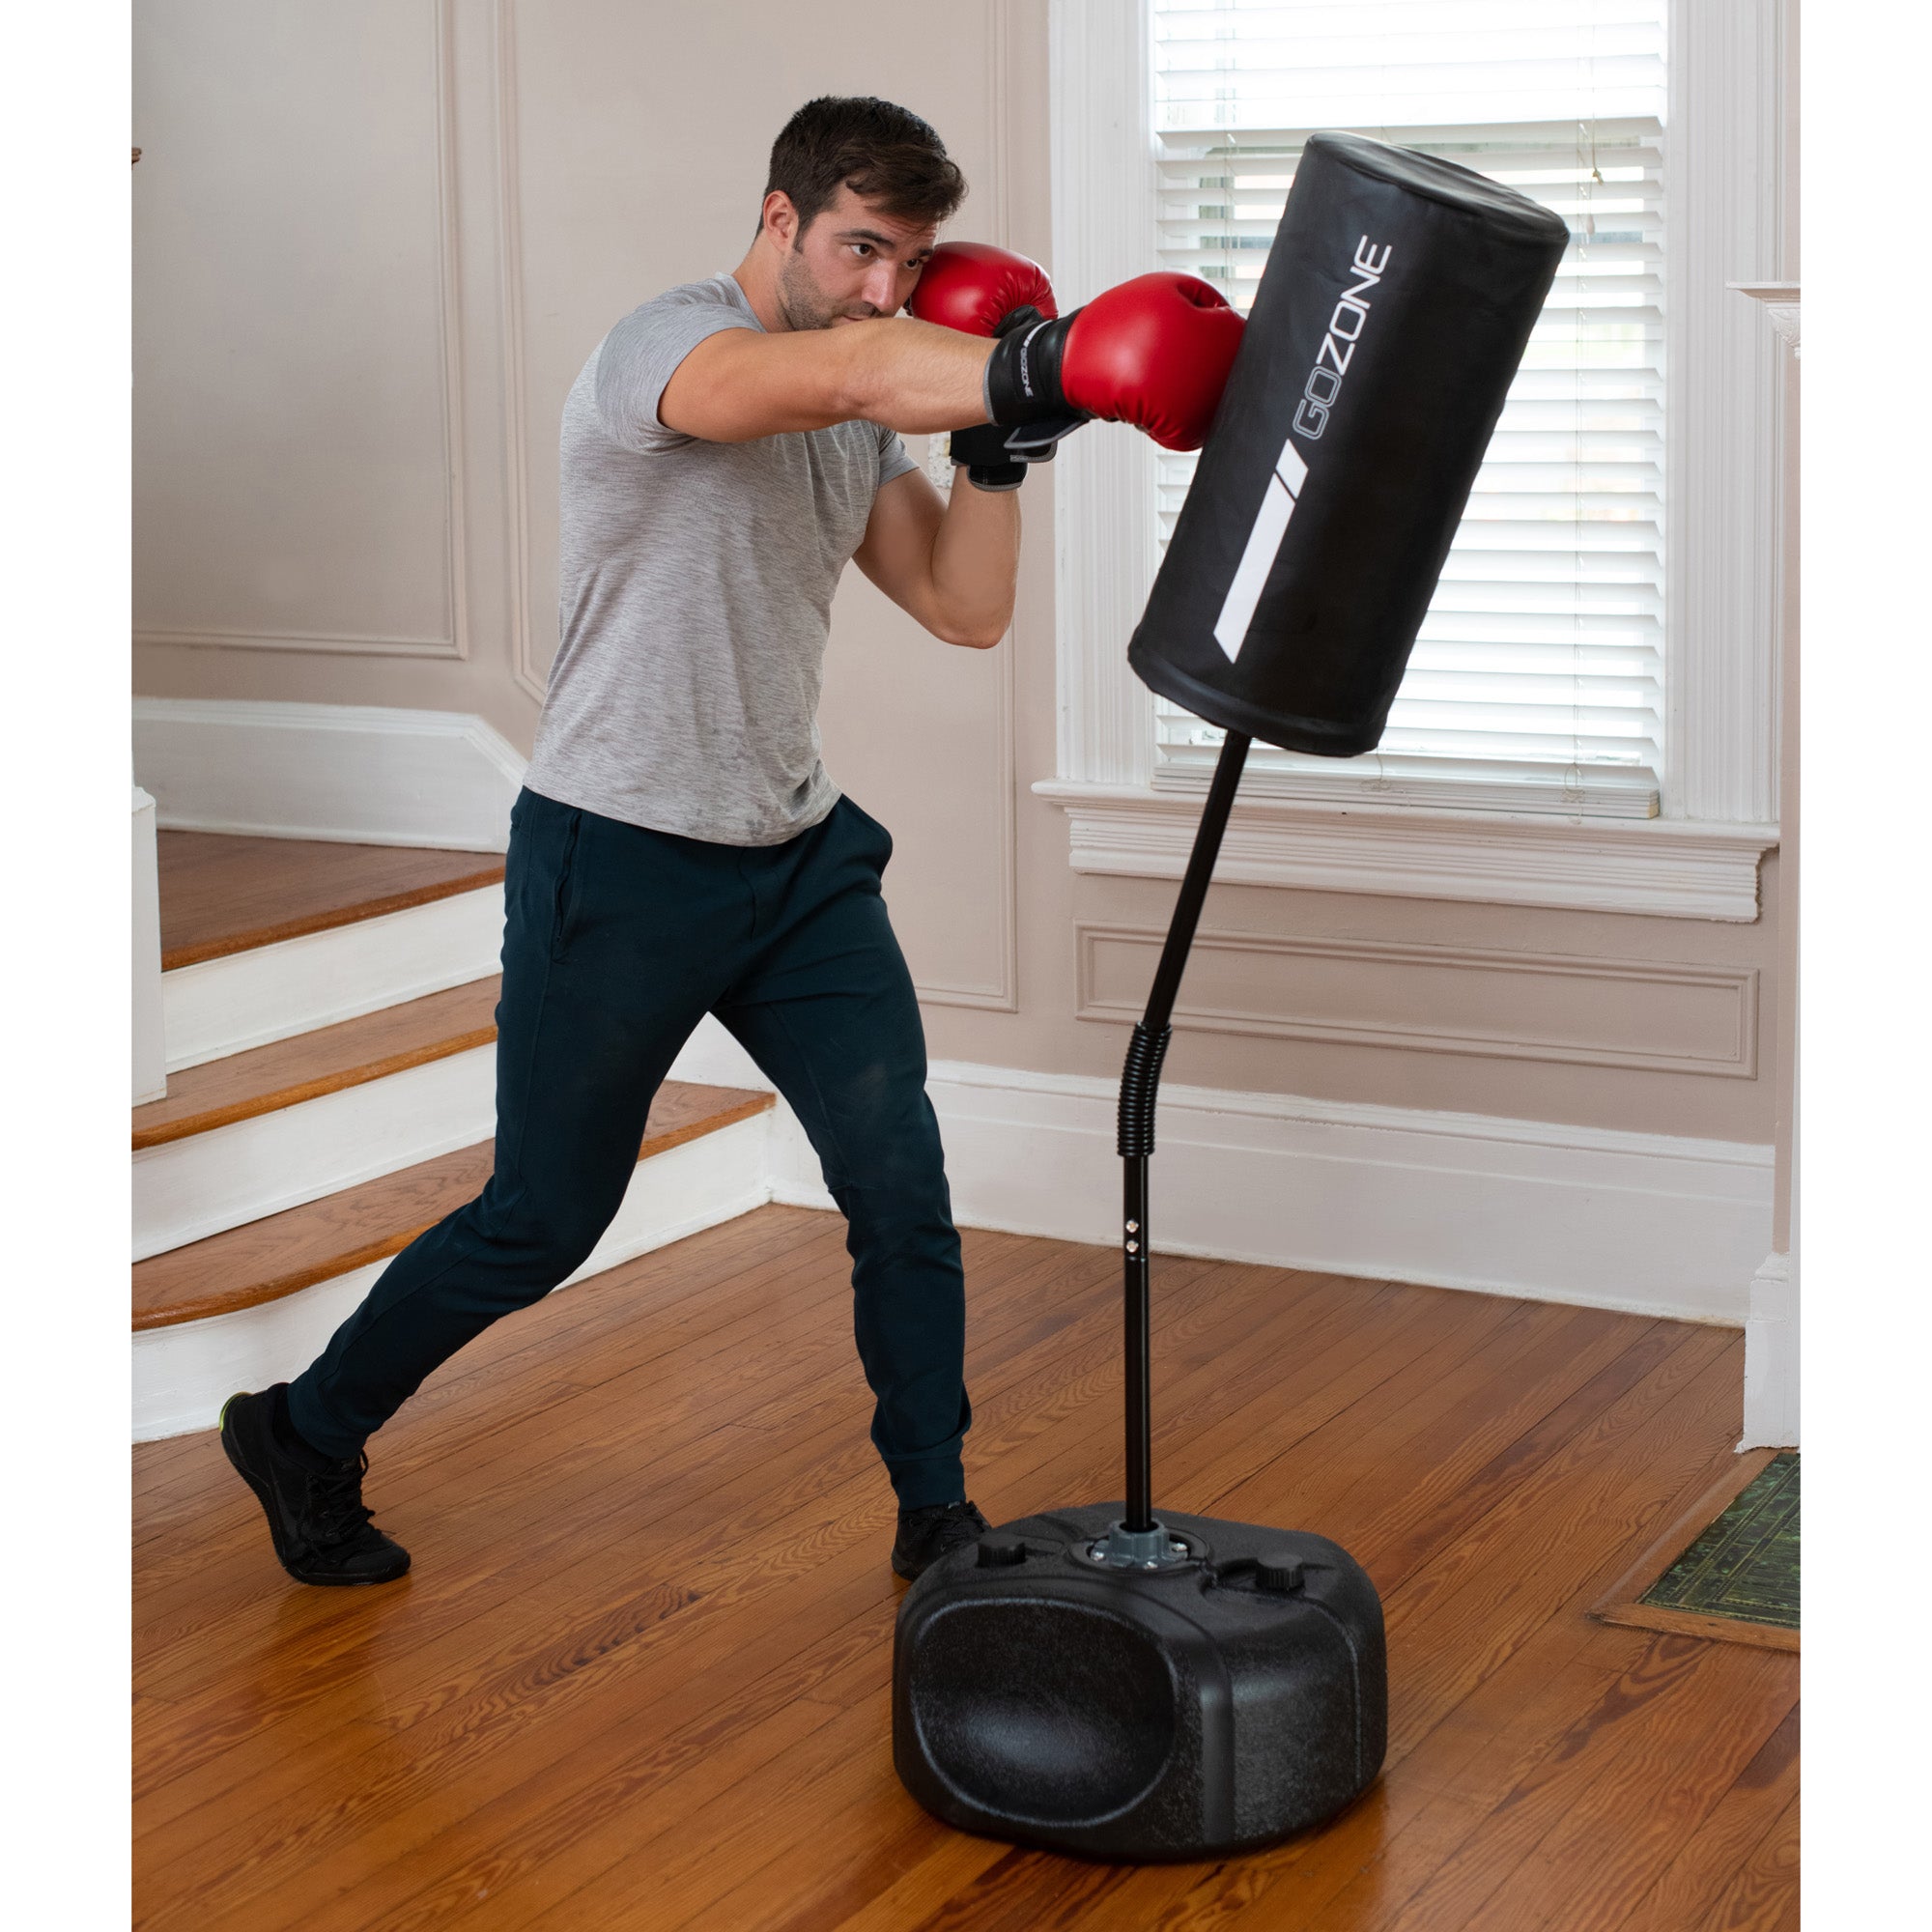 How to Do Heavy Bag Workout for Cardio to Burn Fat